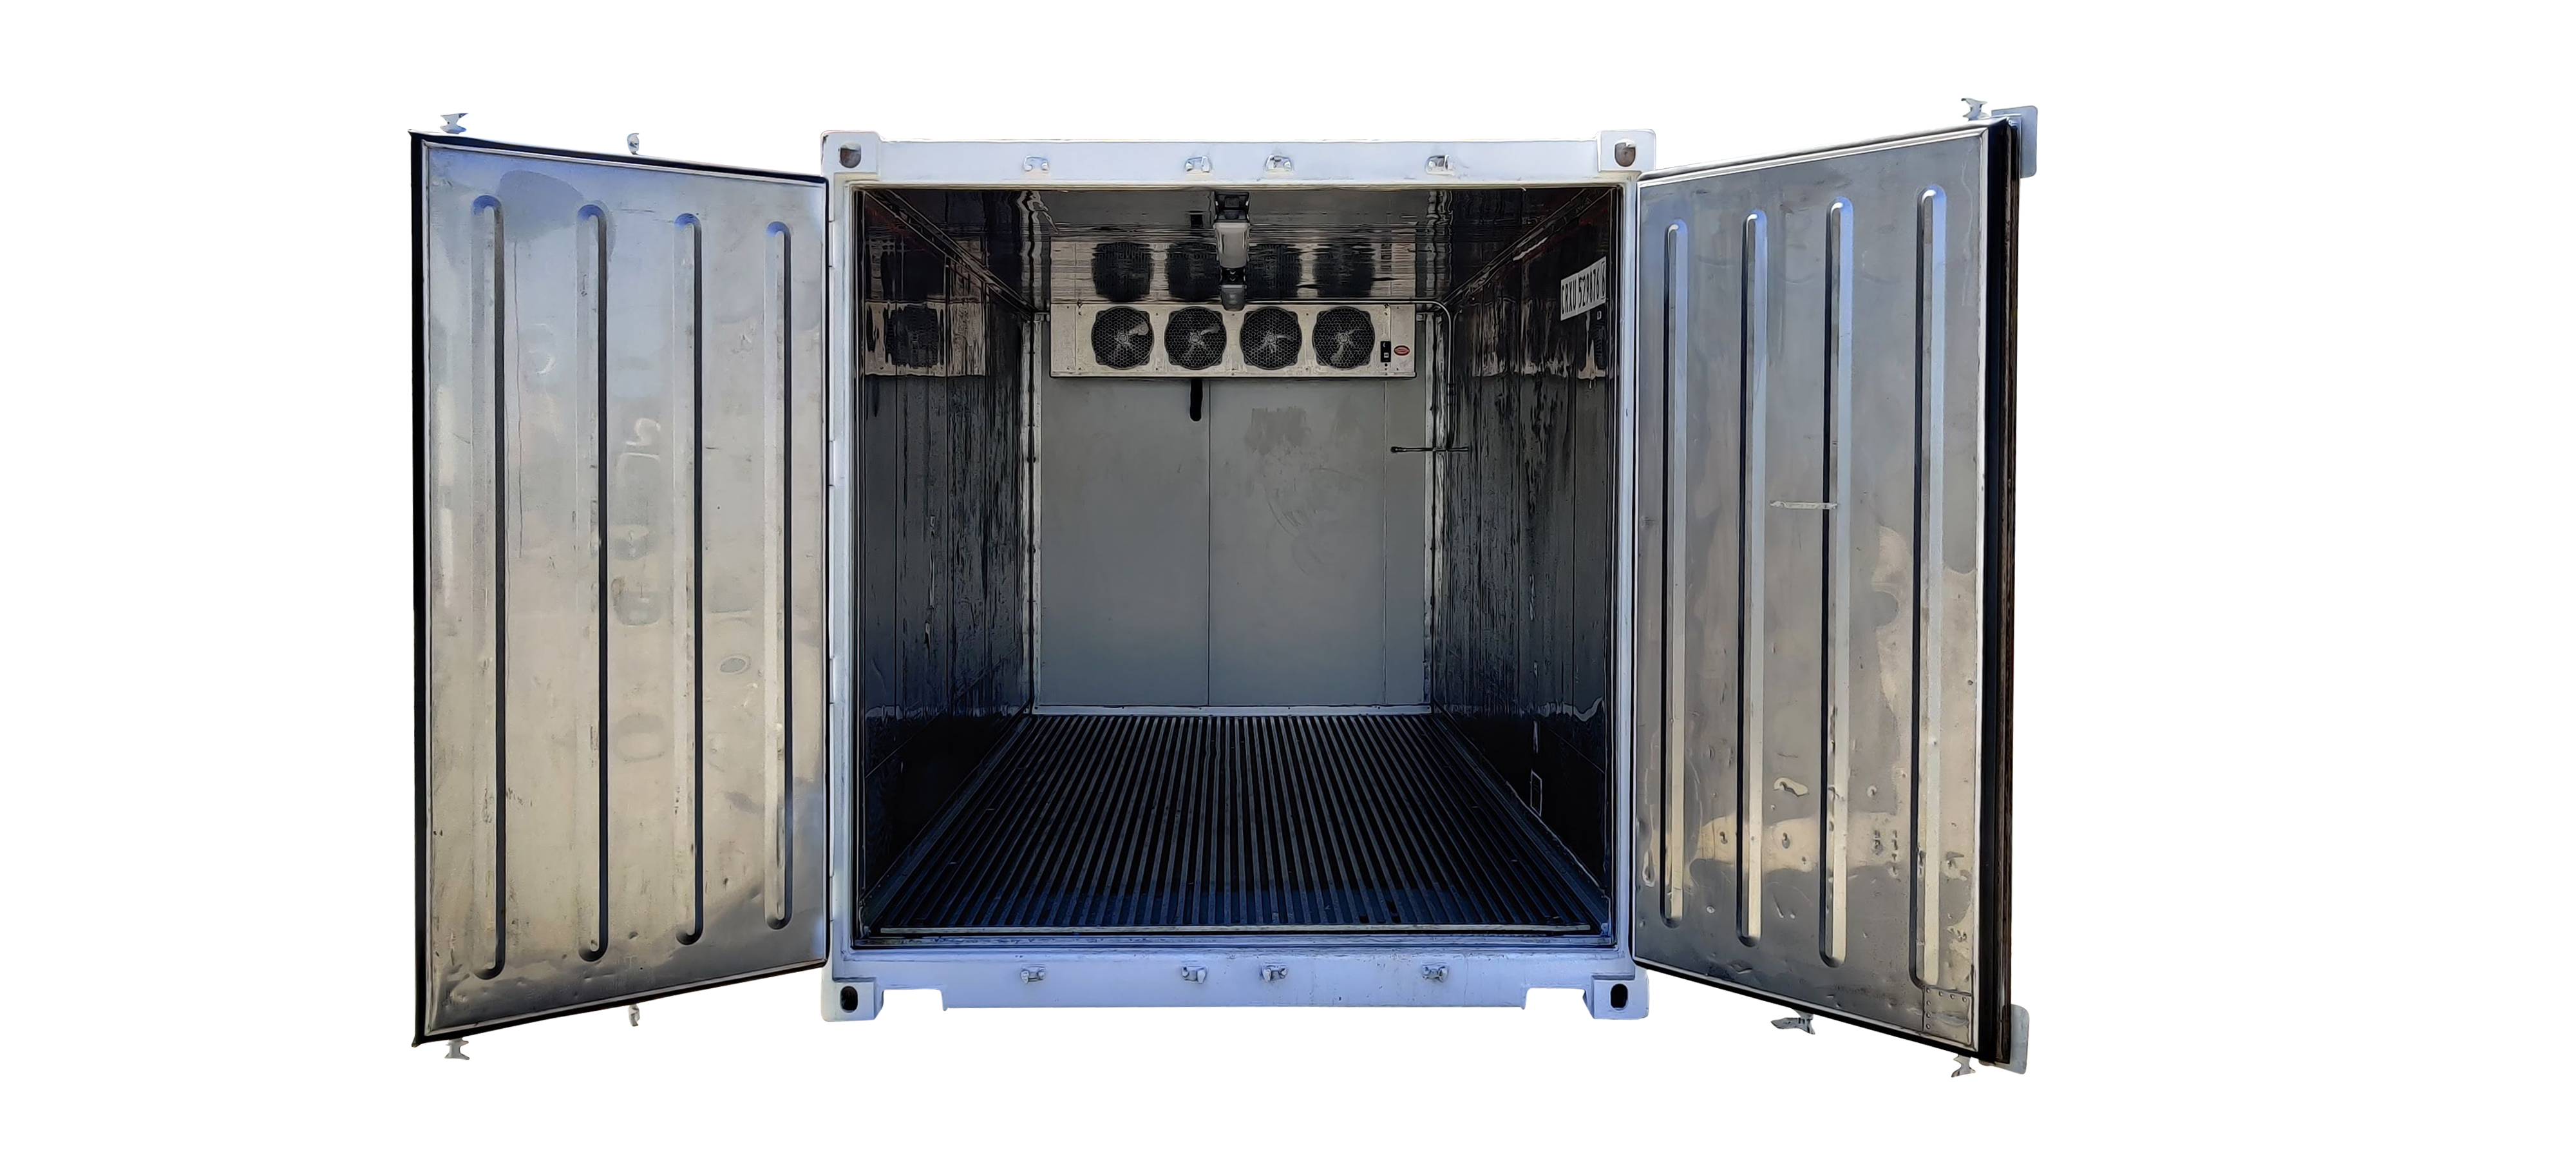 40' Reefer Container freezer  40 Foot Refrigerated Containers